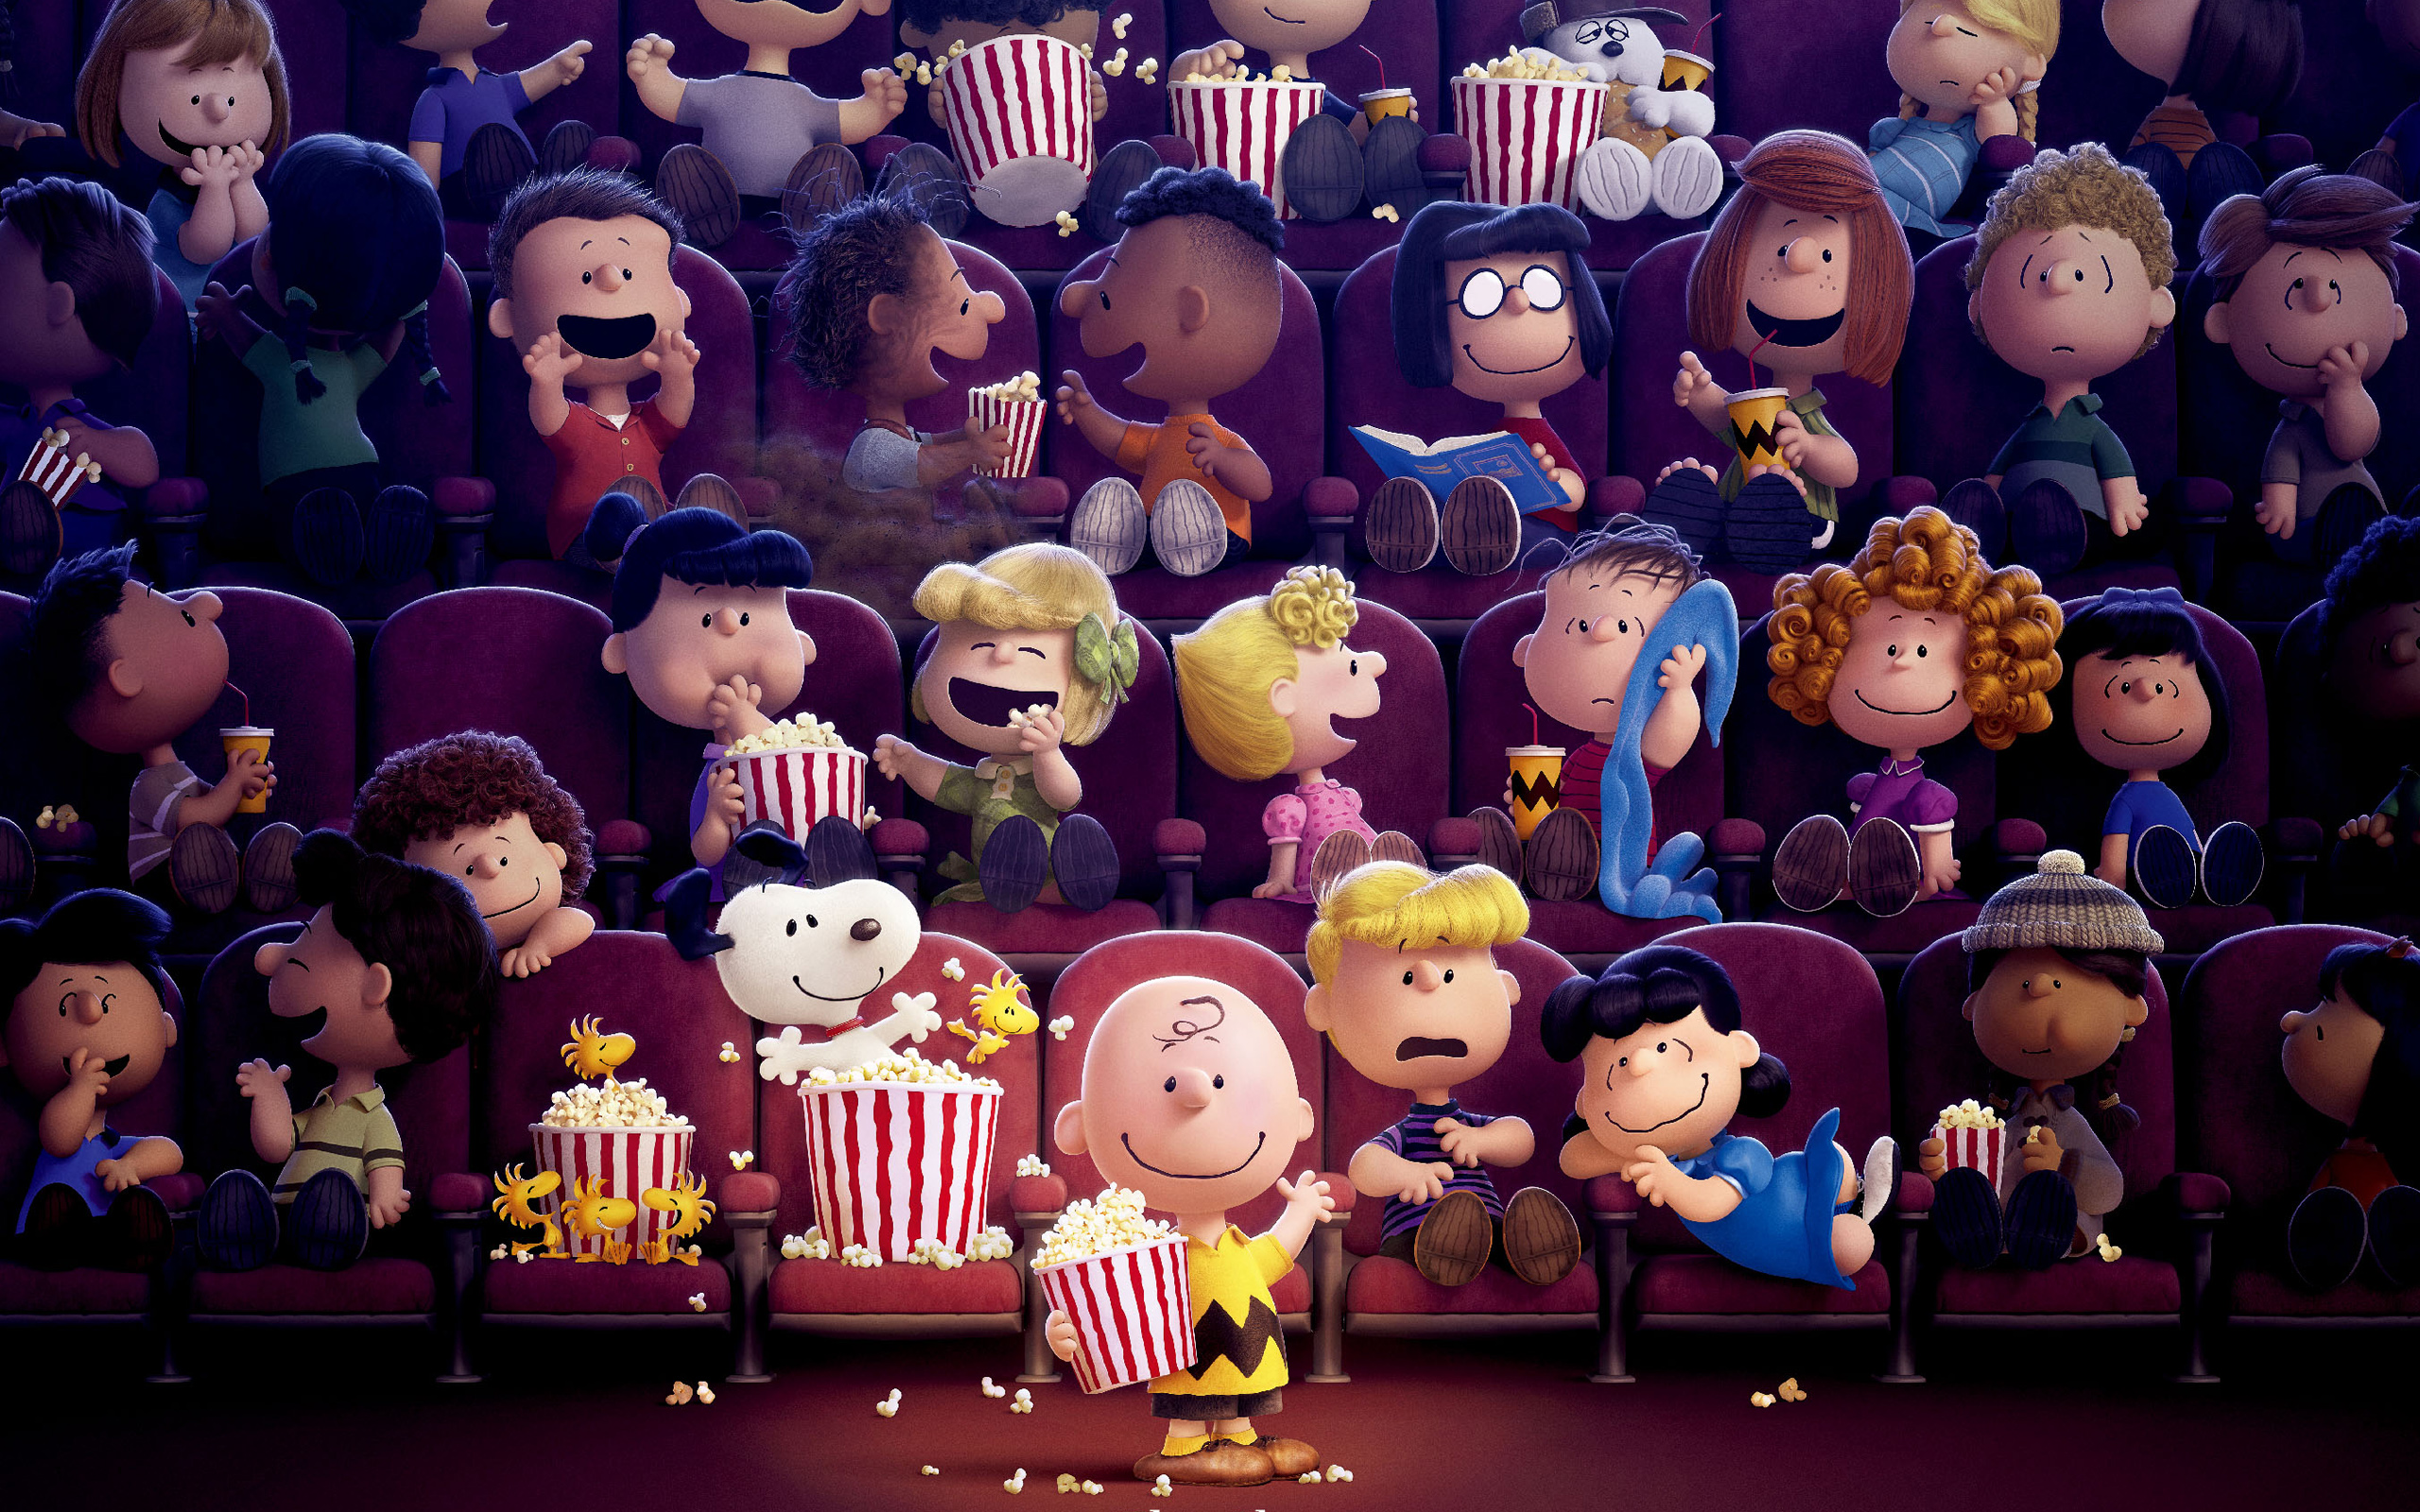 Pc Px Movie Wallpaper, - Charlie Brown In The Movies - HD Wallpaper 